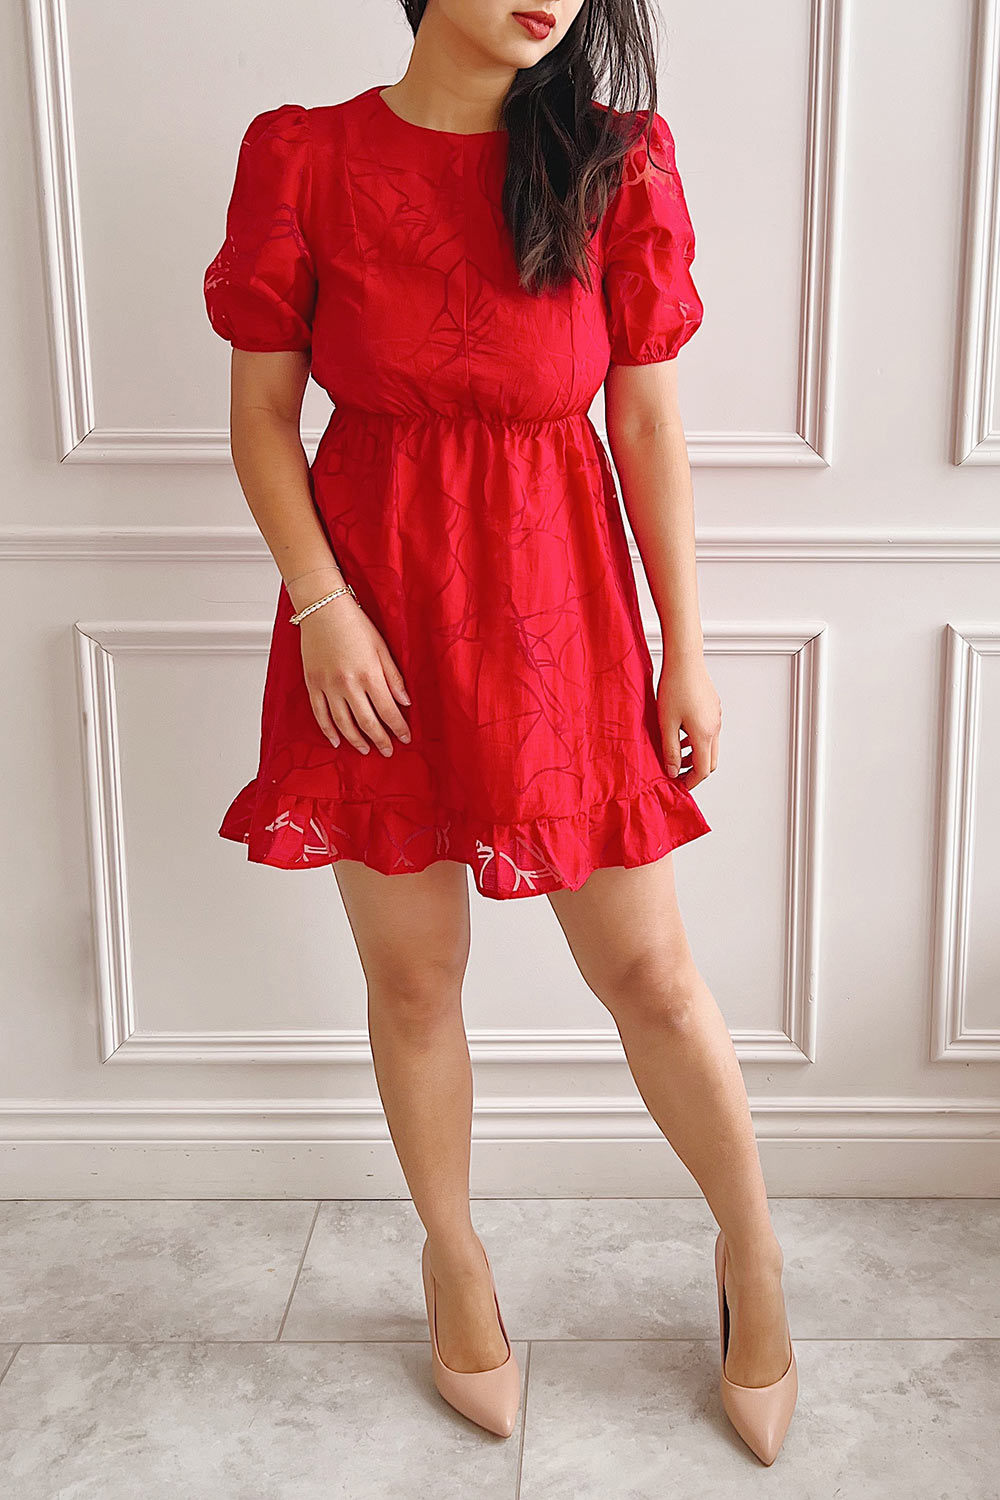 Wet Look Pencil Micro Mini Dress Women's Red Fitted Short Scoop Neck Dresses  | eBay